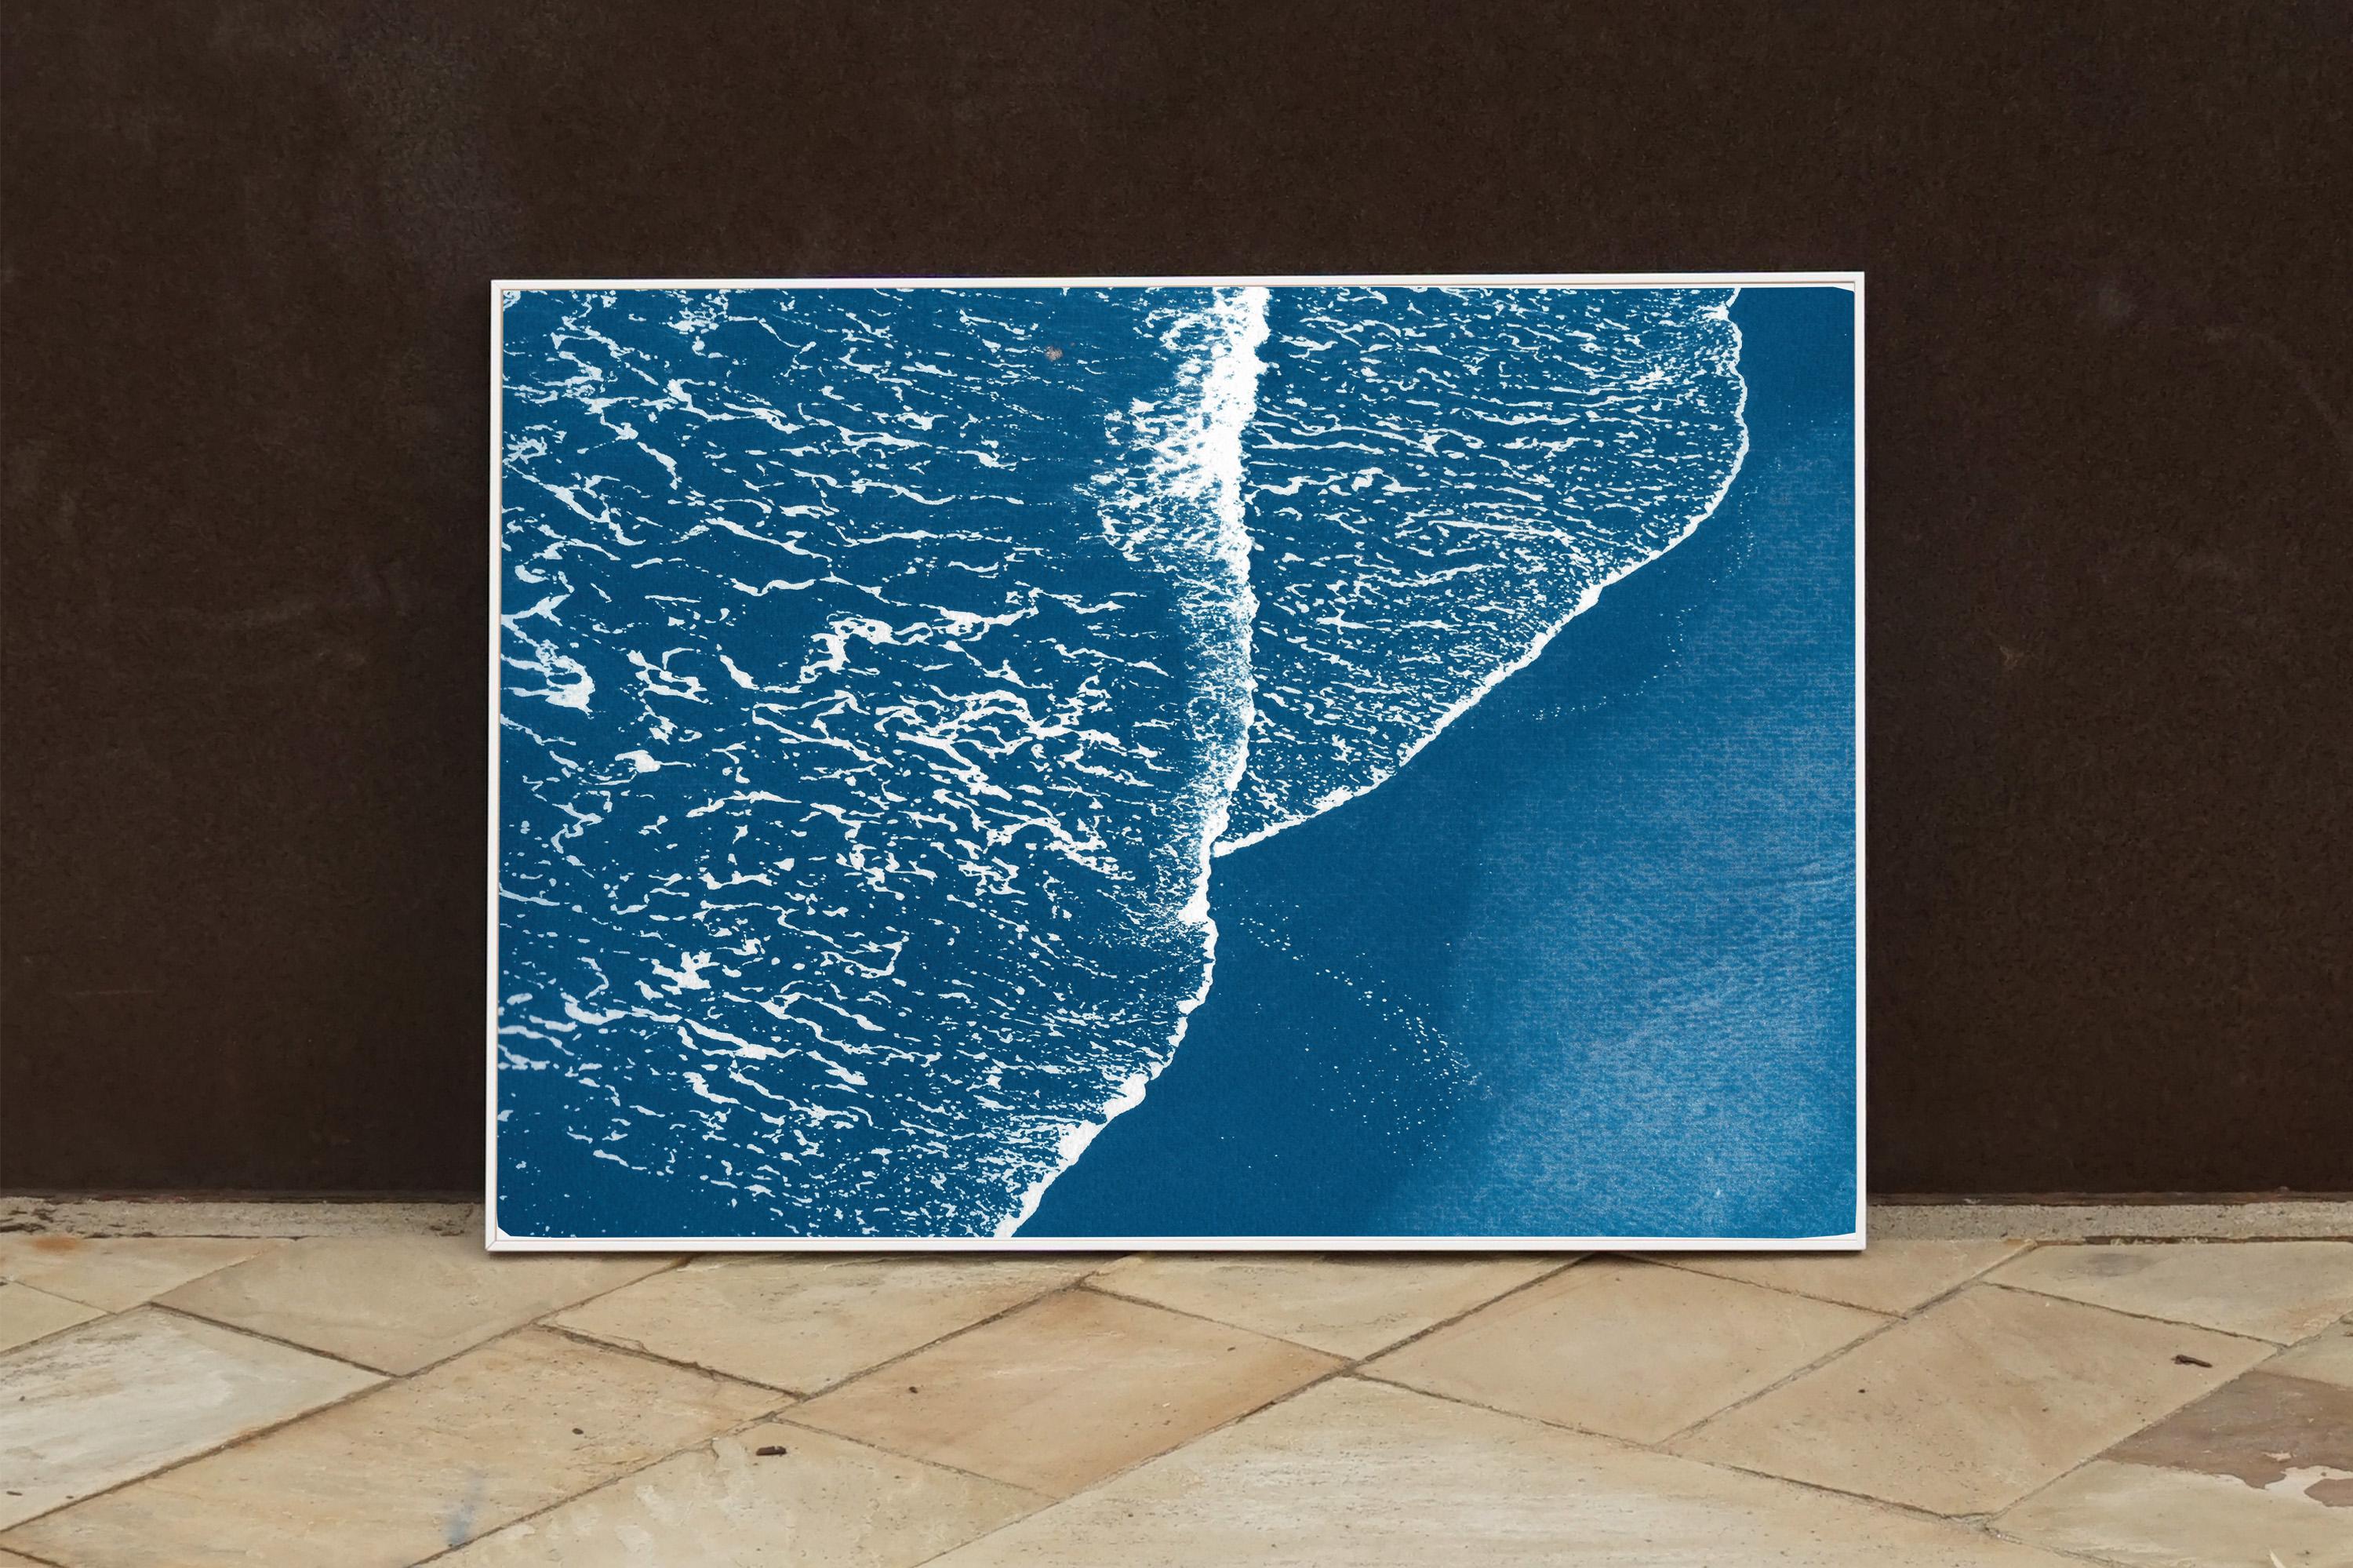 Pacific Foamy Shorelines, Original Cyanotype on Paper, Exquisite Blue and White  1